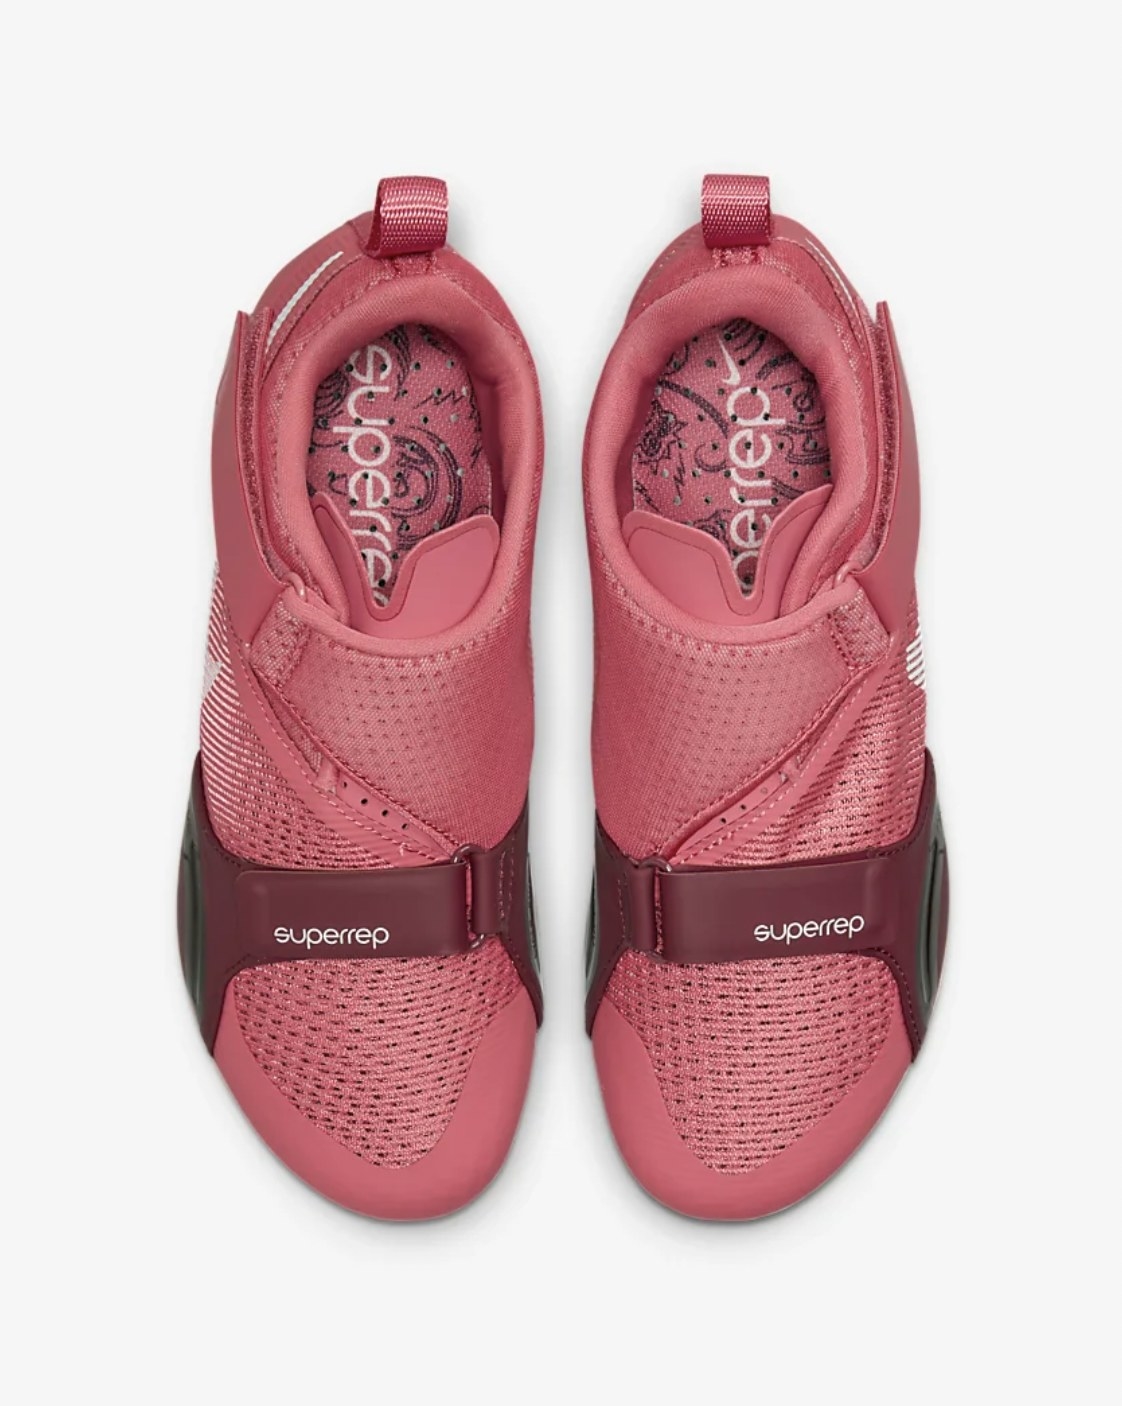 The pink cycling shoes